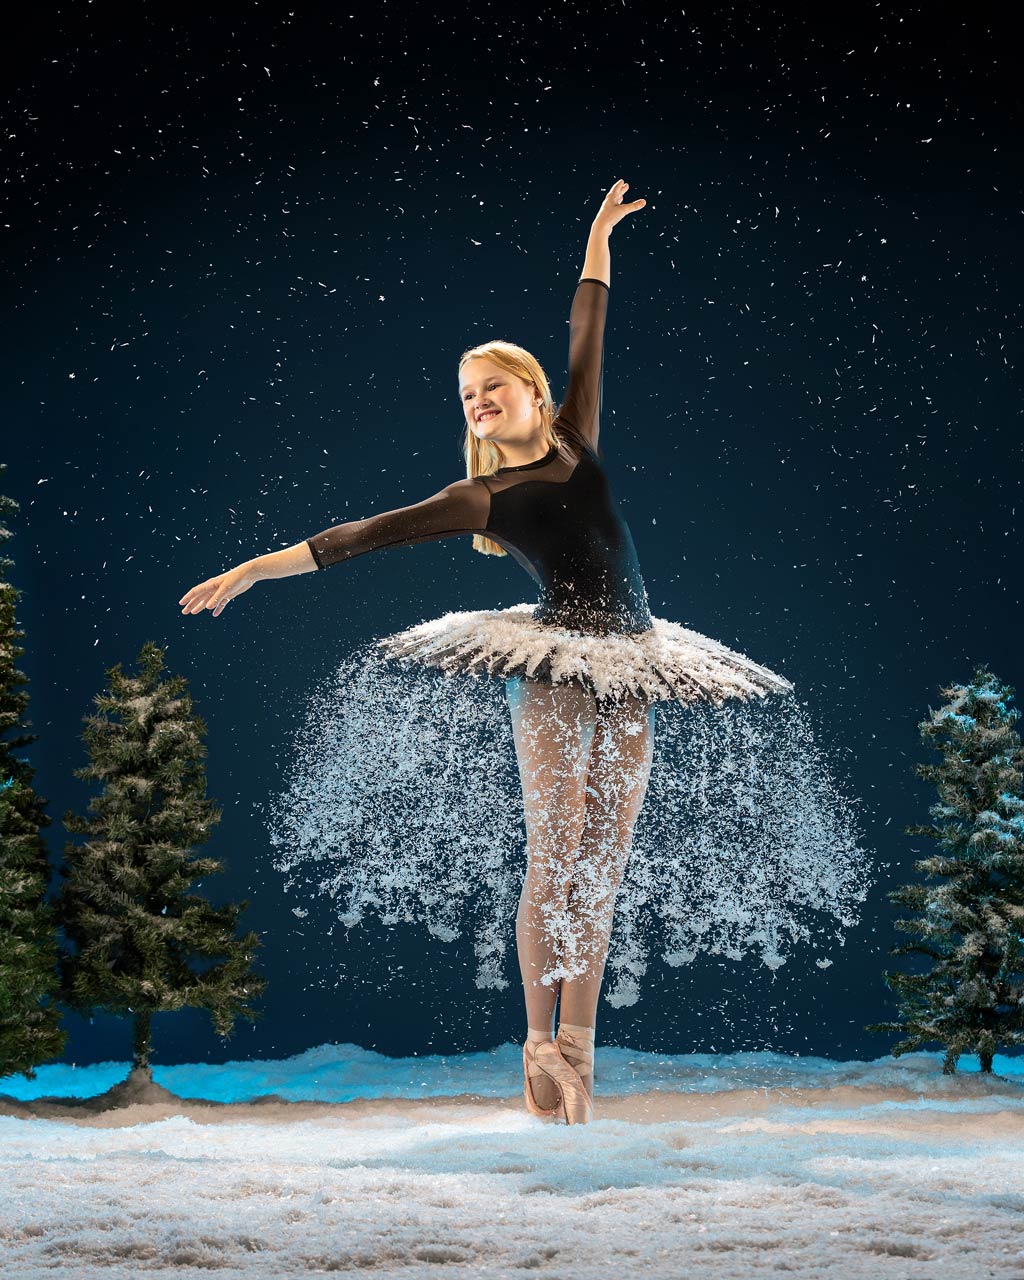 Exulting Images ballet photography of dancer in black tutu dusted with snow next to small evergreens trees